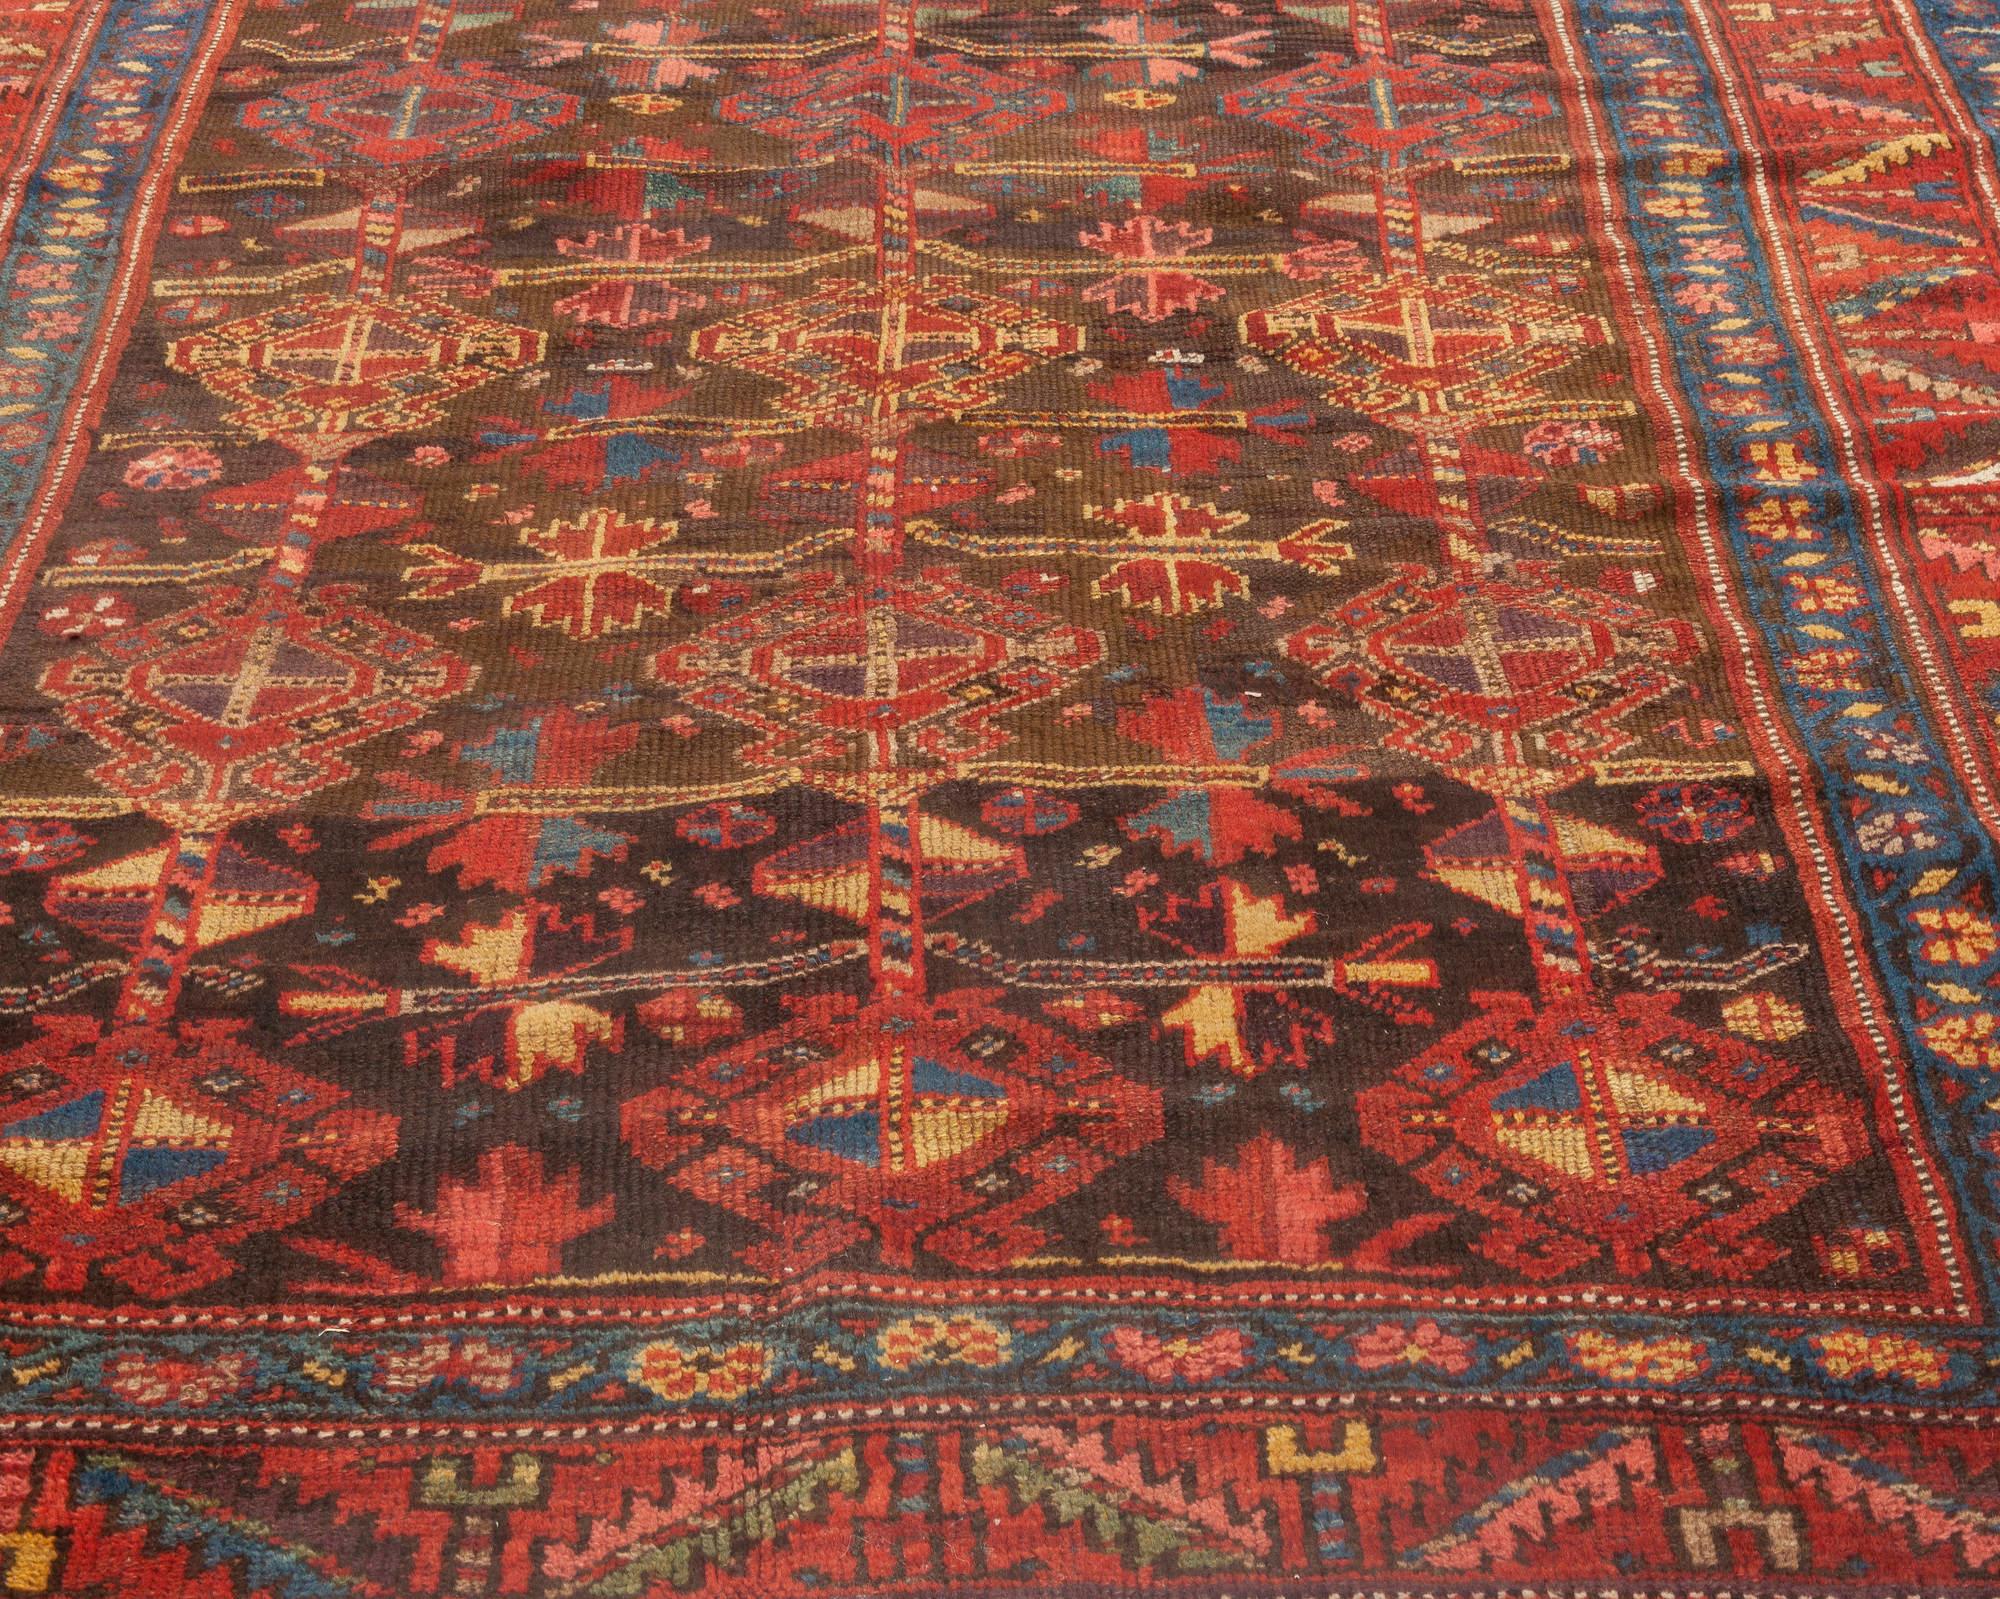 20th Century 1900s Persian Malayer Geometric Handmade Wool Rug in Red, Blue, Yellow and Black